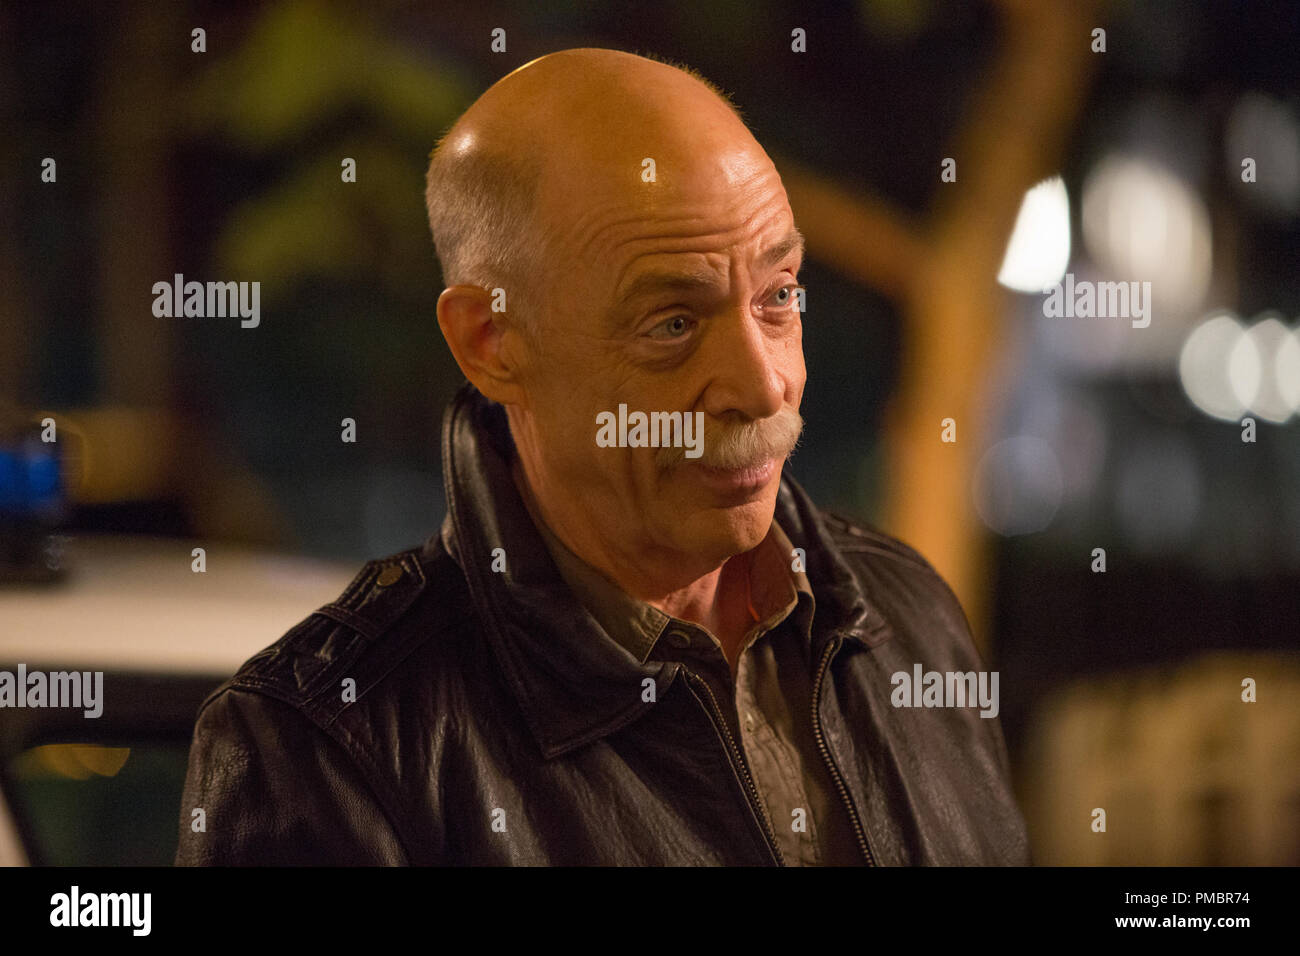 J.K. Simmons as Zipper Photo by Jaimie Trueblood, Courtesy of Sony Pictures Classics Stock Photo